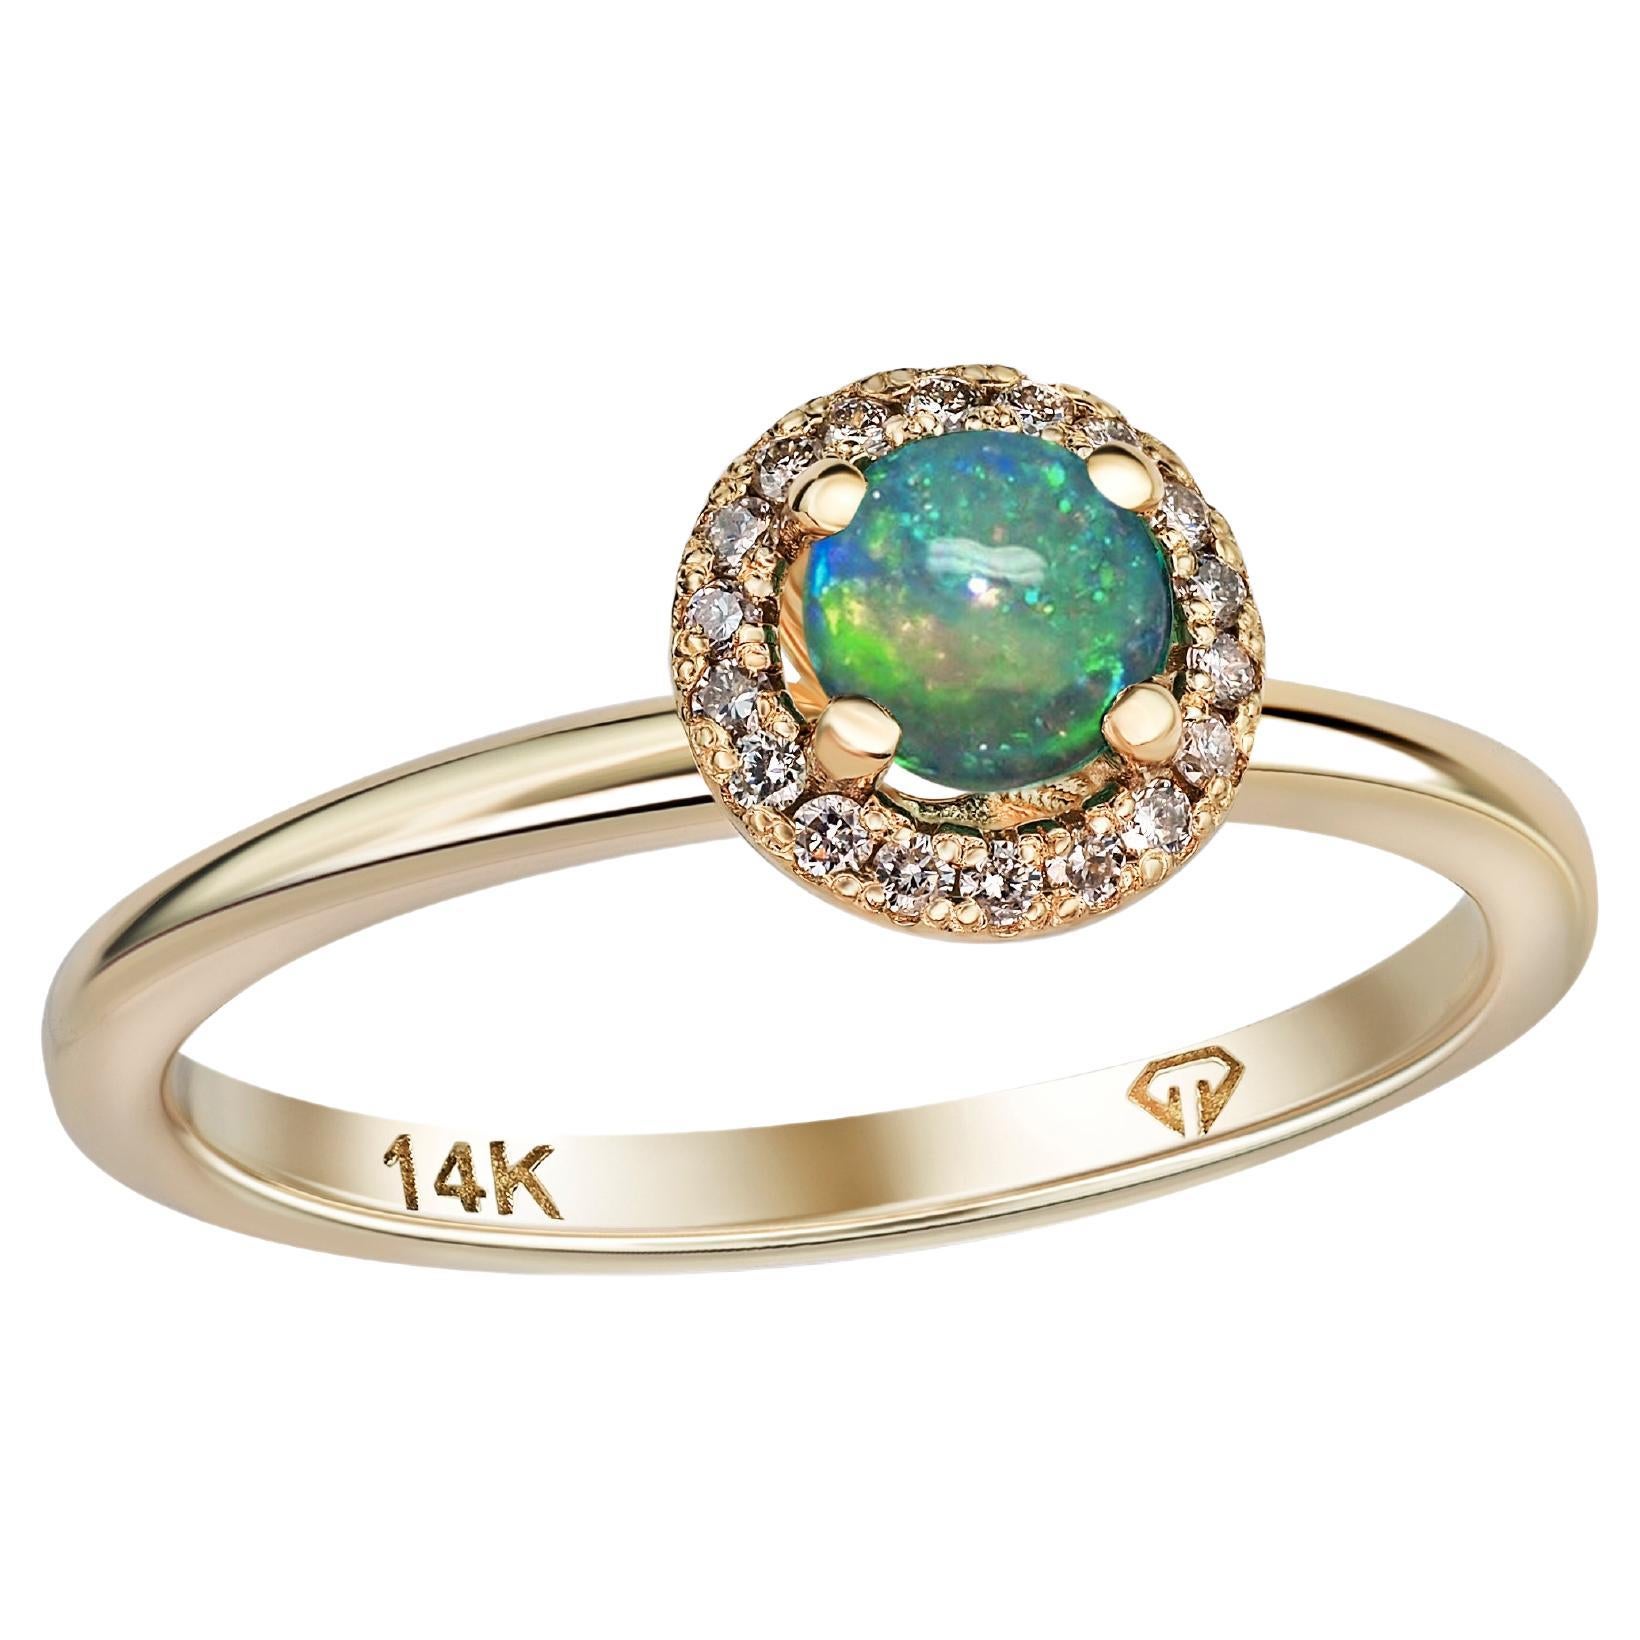 Opal and Diamonds 14k Gold Ring. Round Halo Opal Gold Ring!